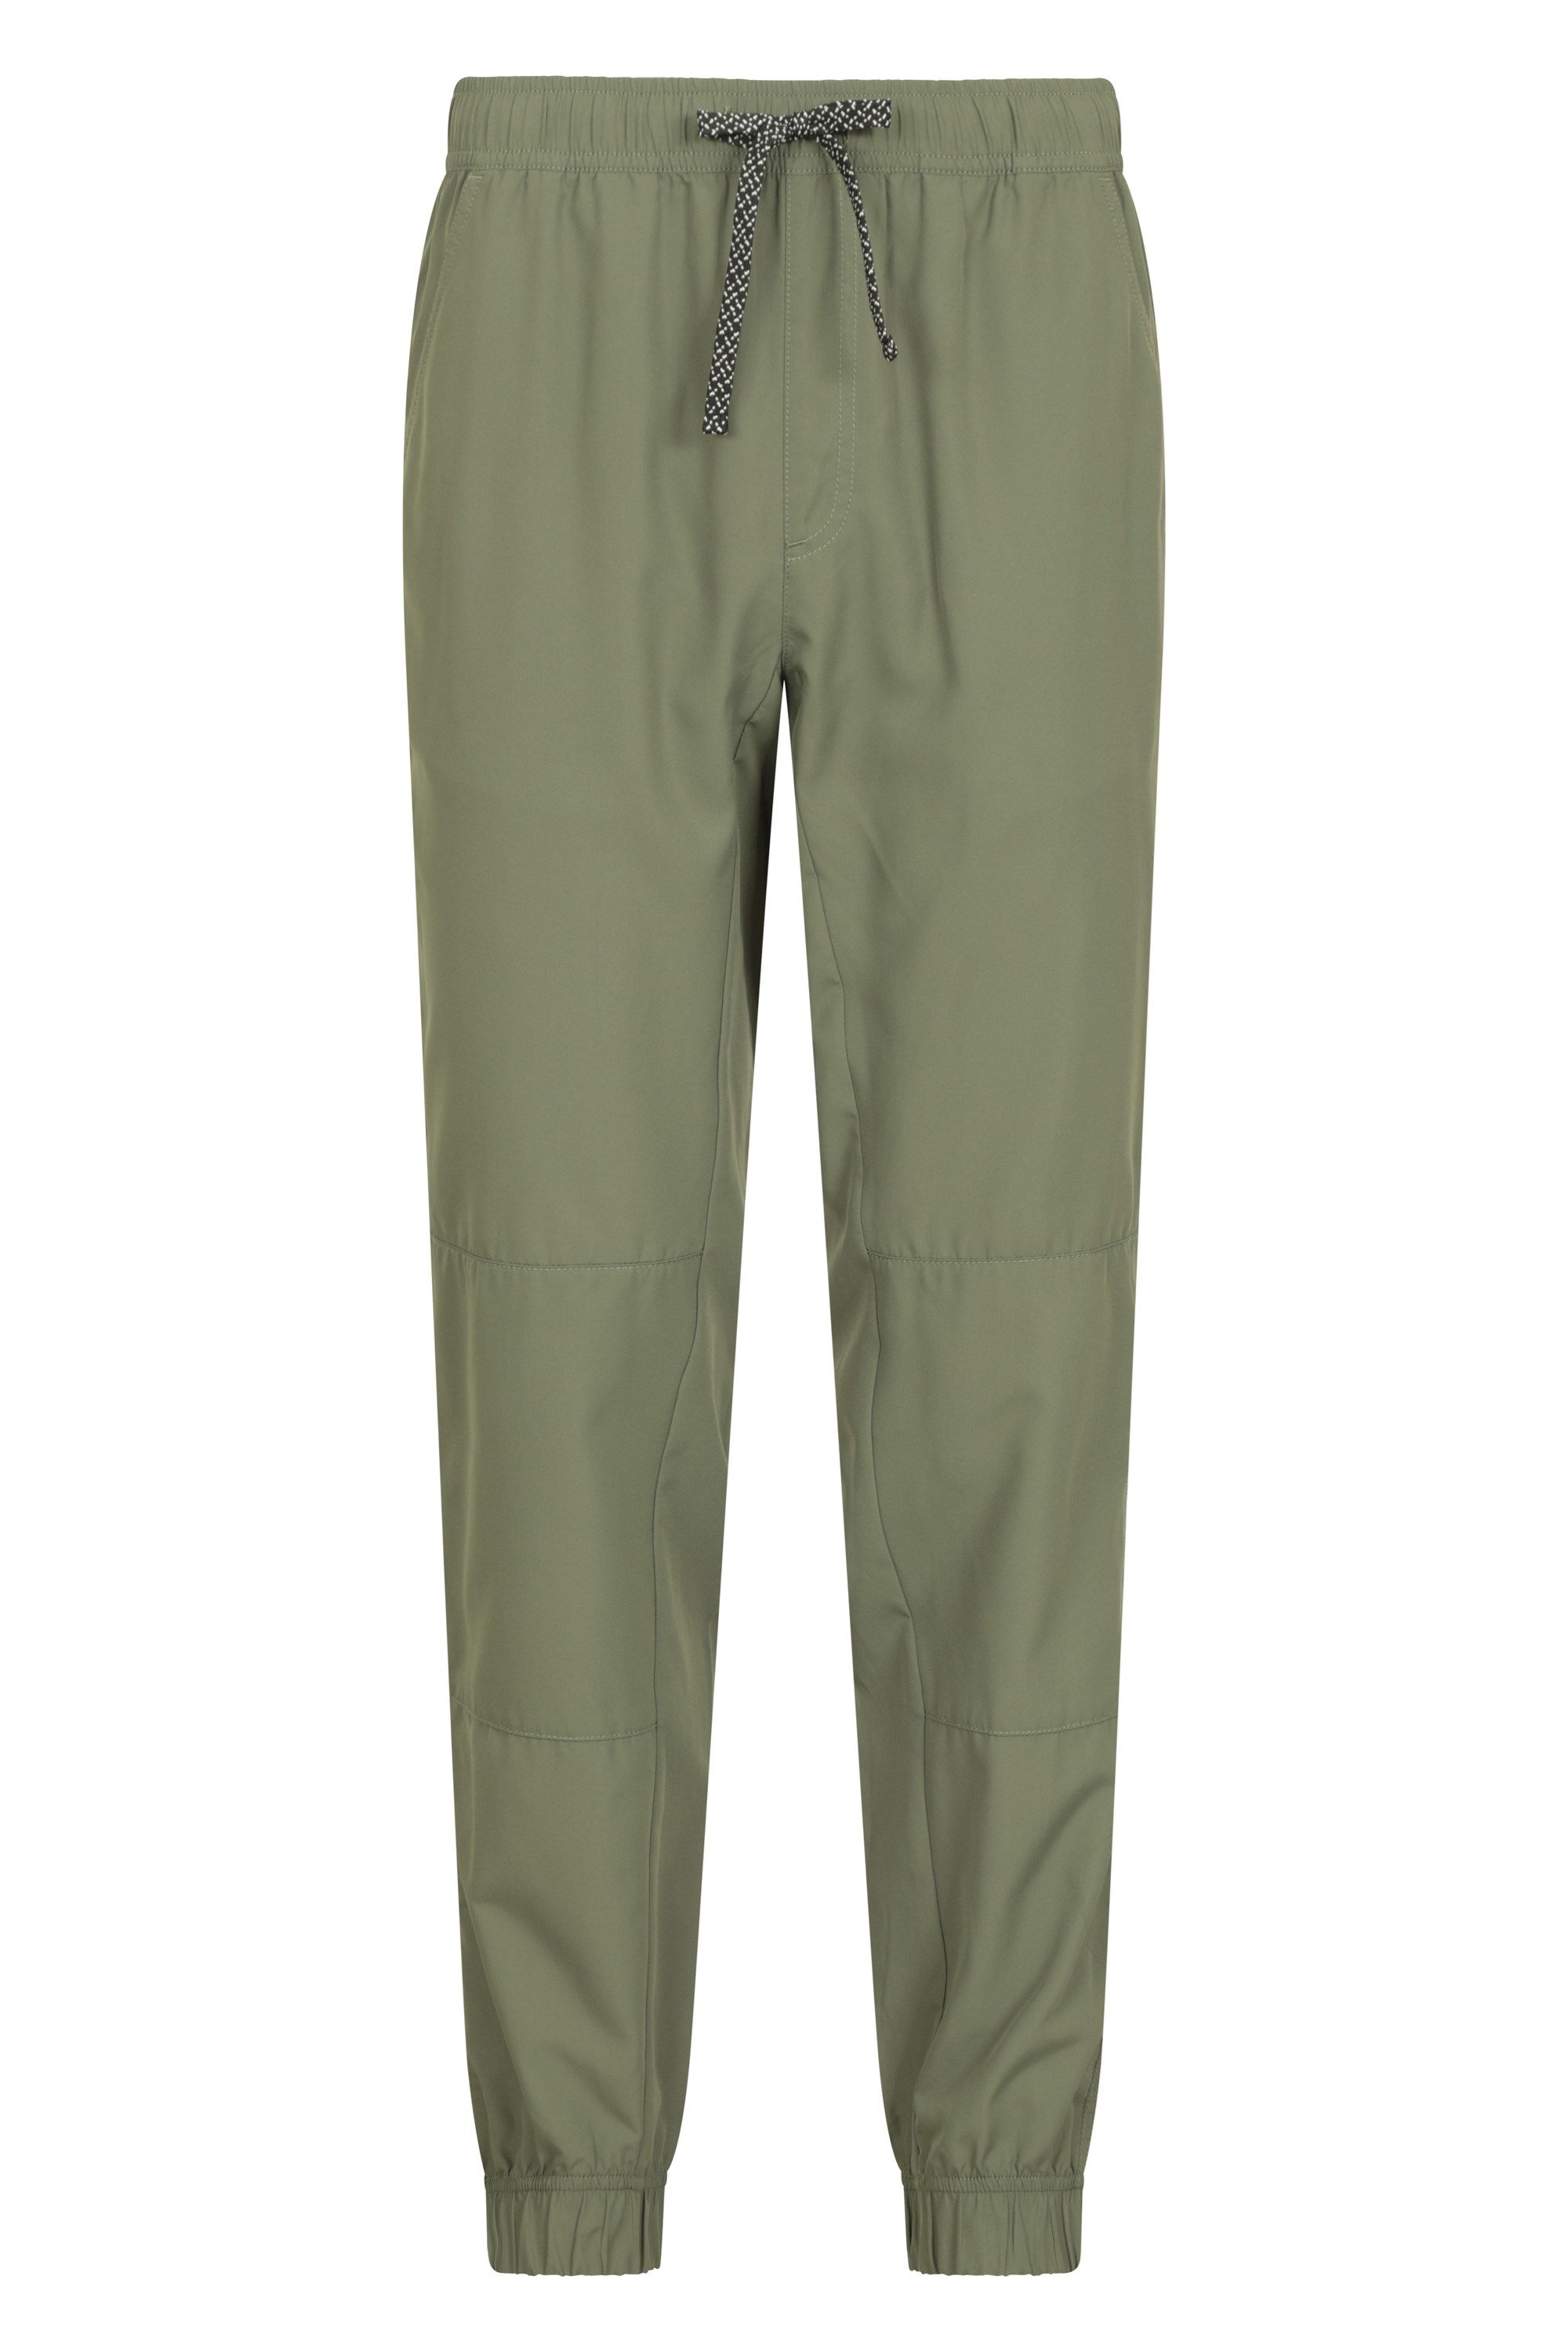 Action Mens Drawcord Walking Trousers - Short - Green